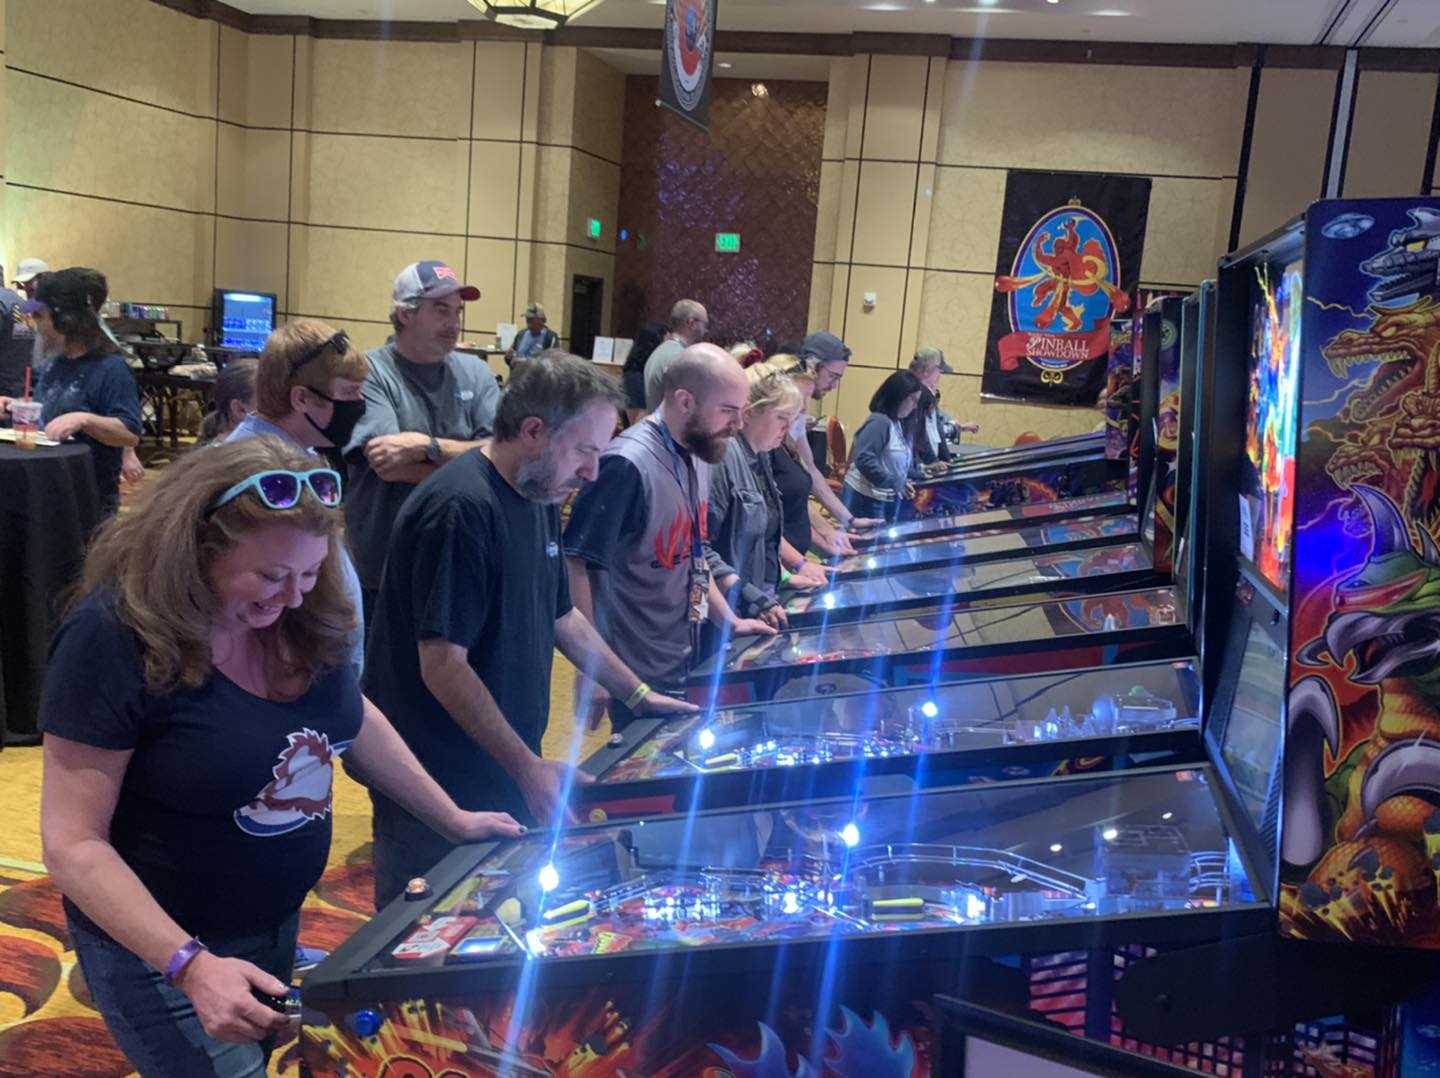 The world's top pinball player is a 19-year-old from Longmont